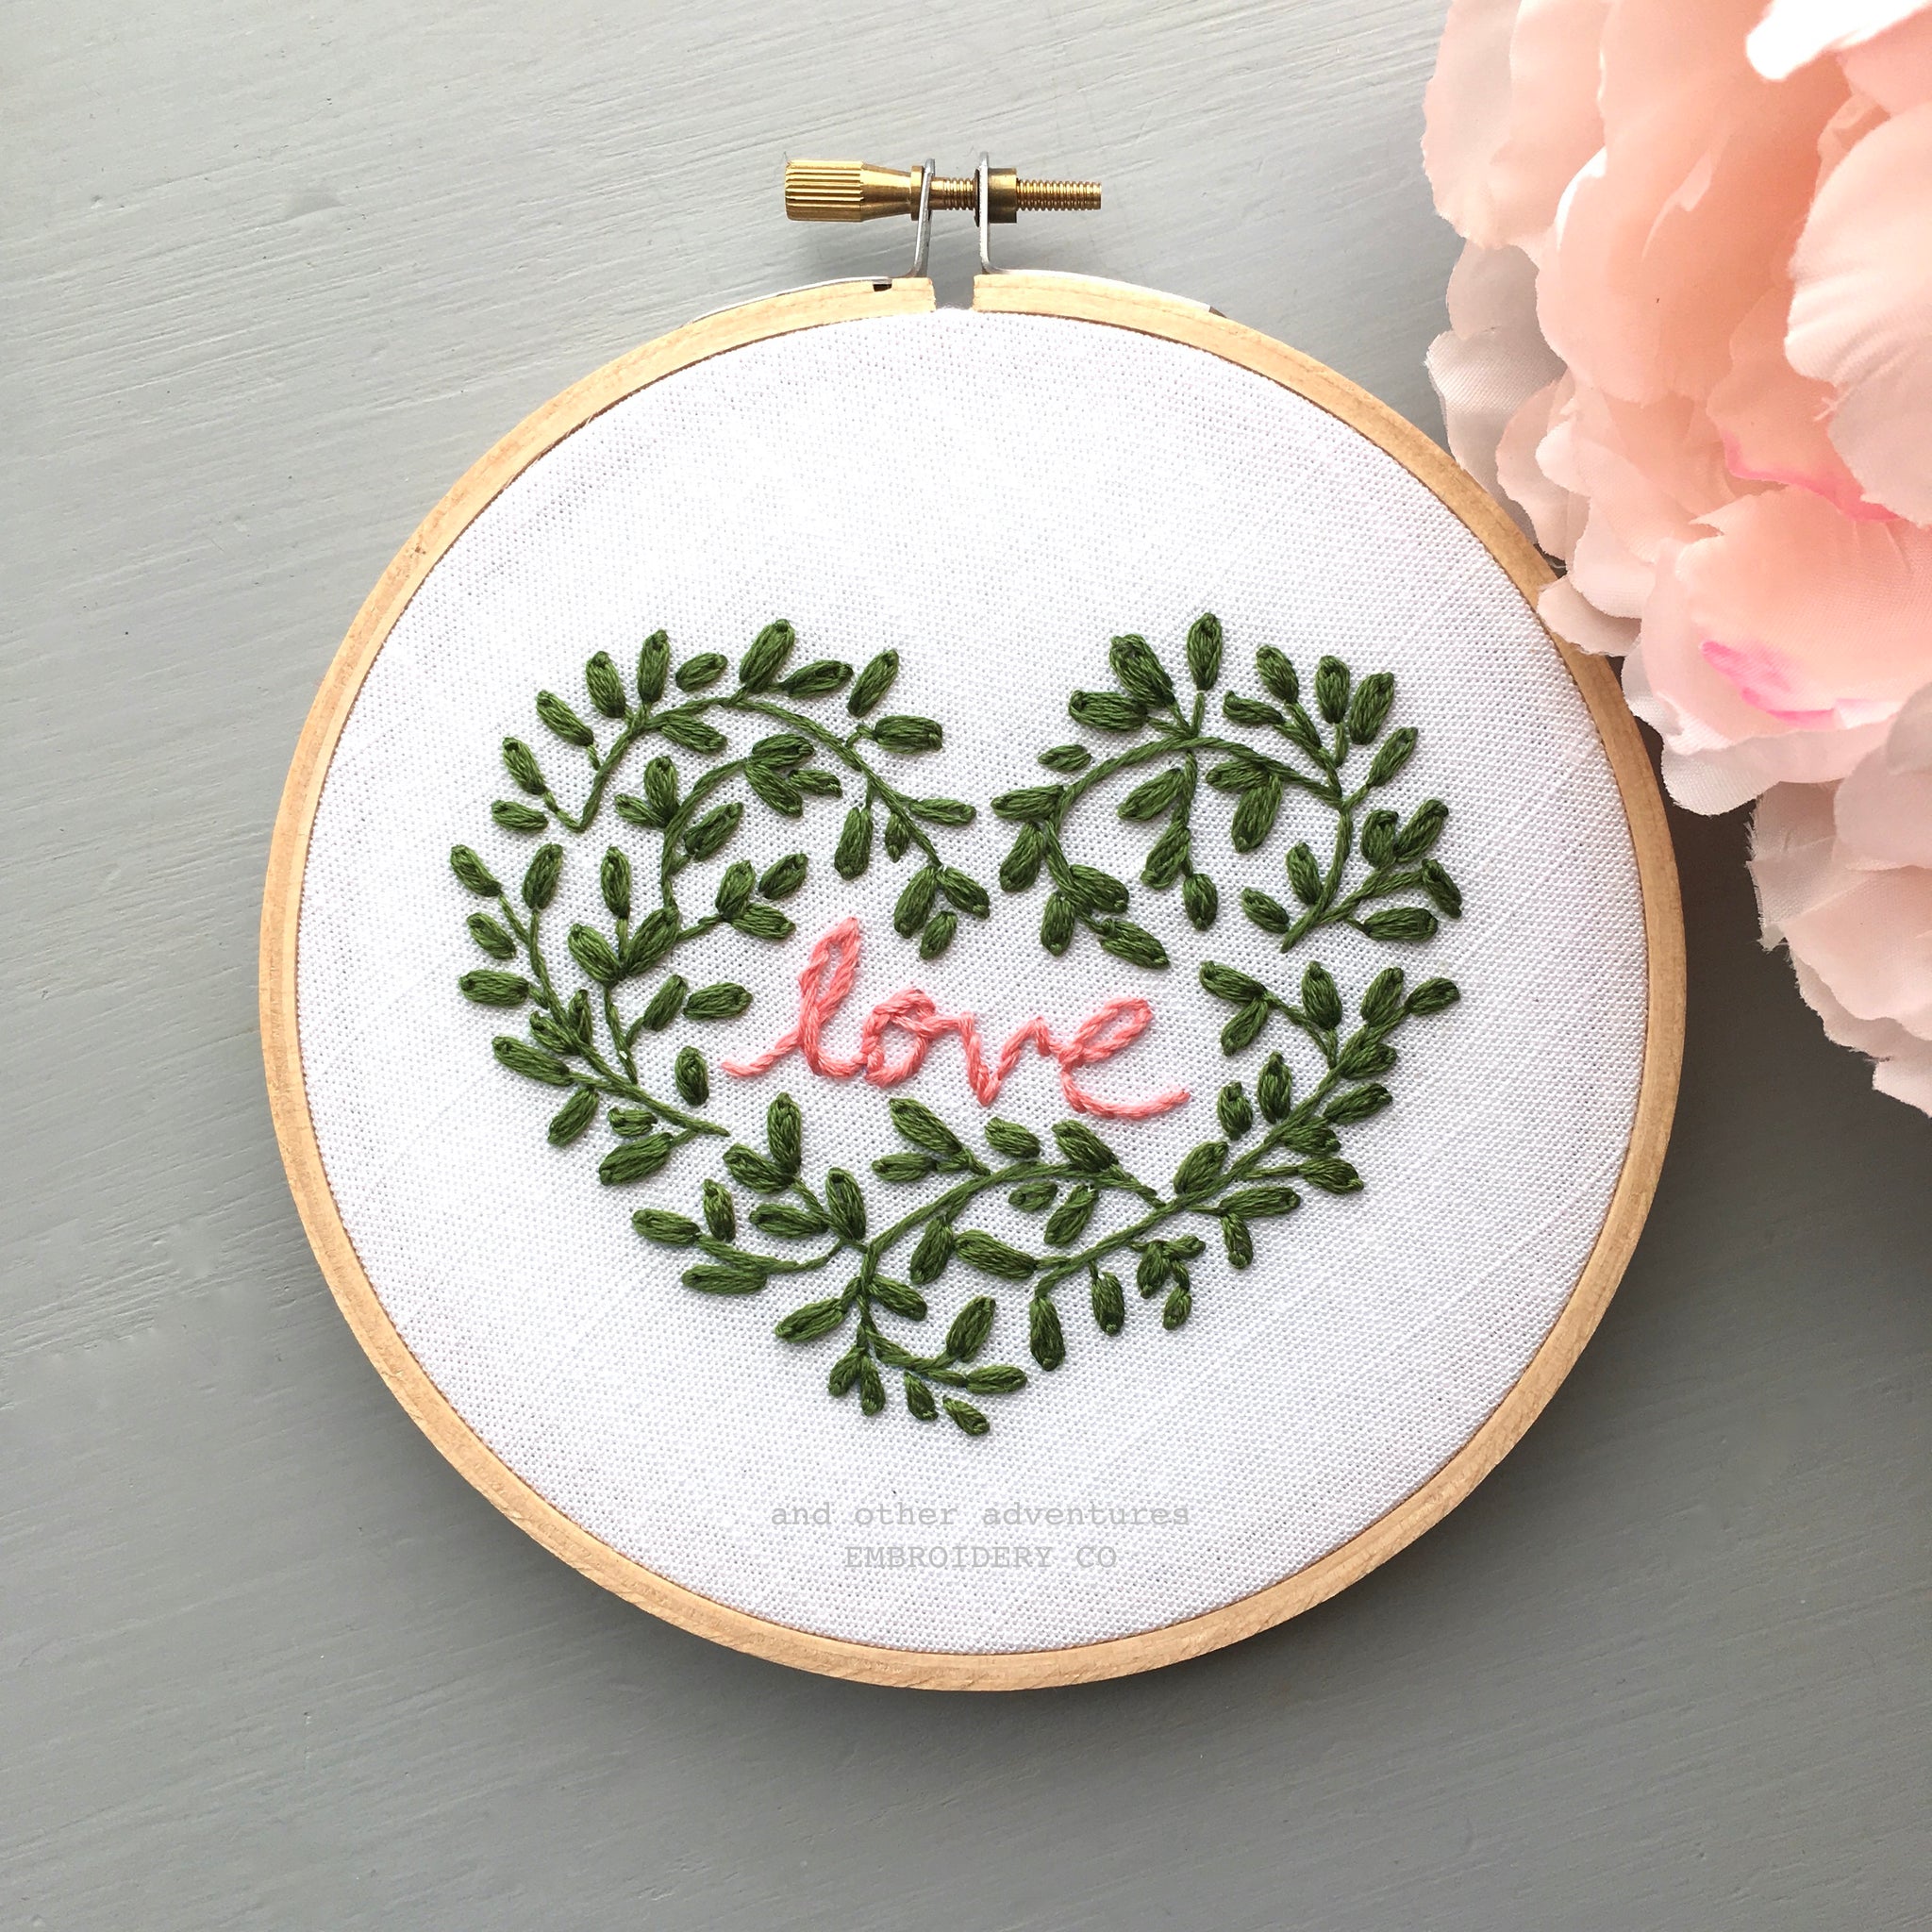 free beginner embroidery patterns